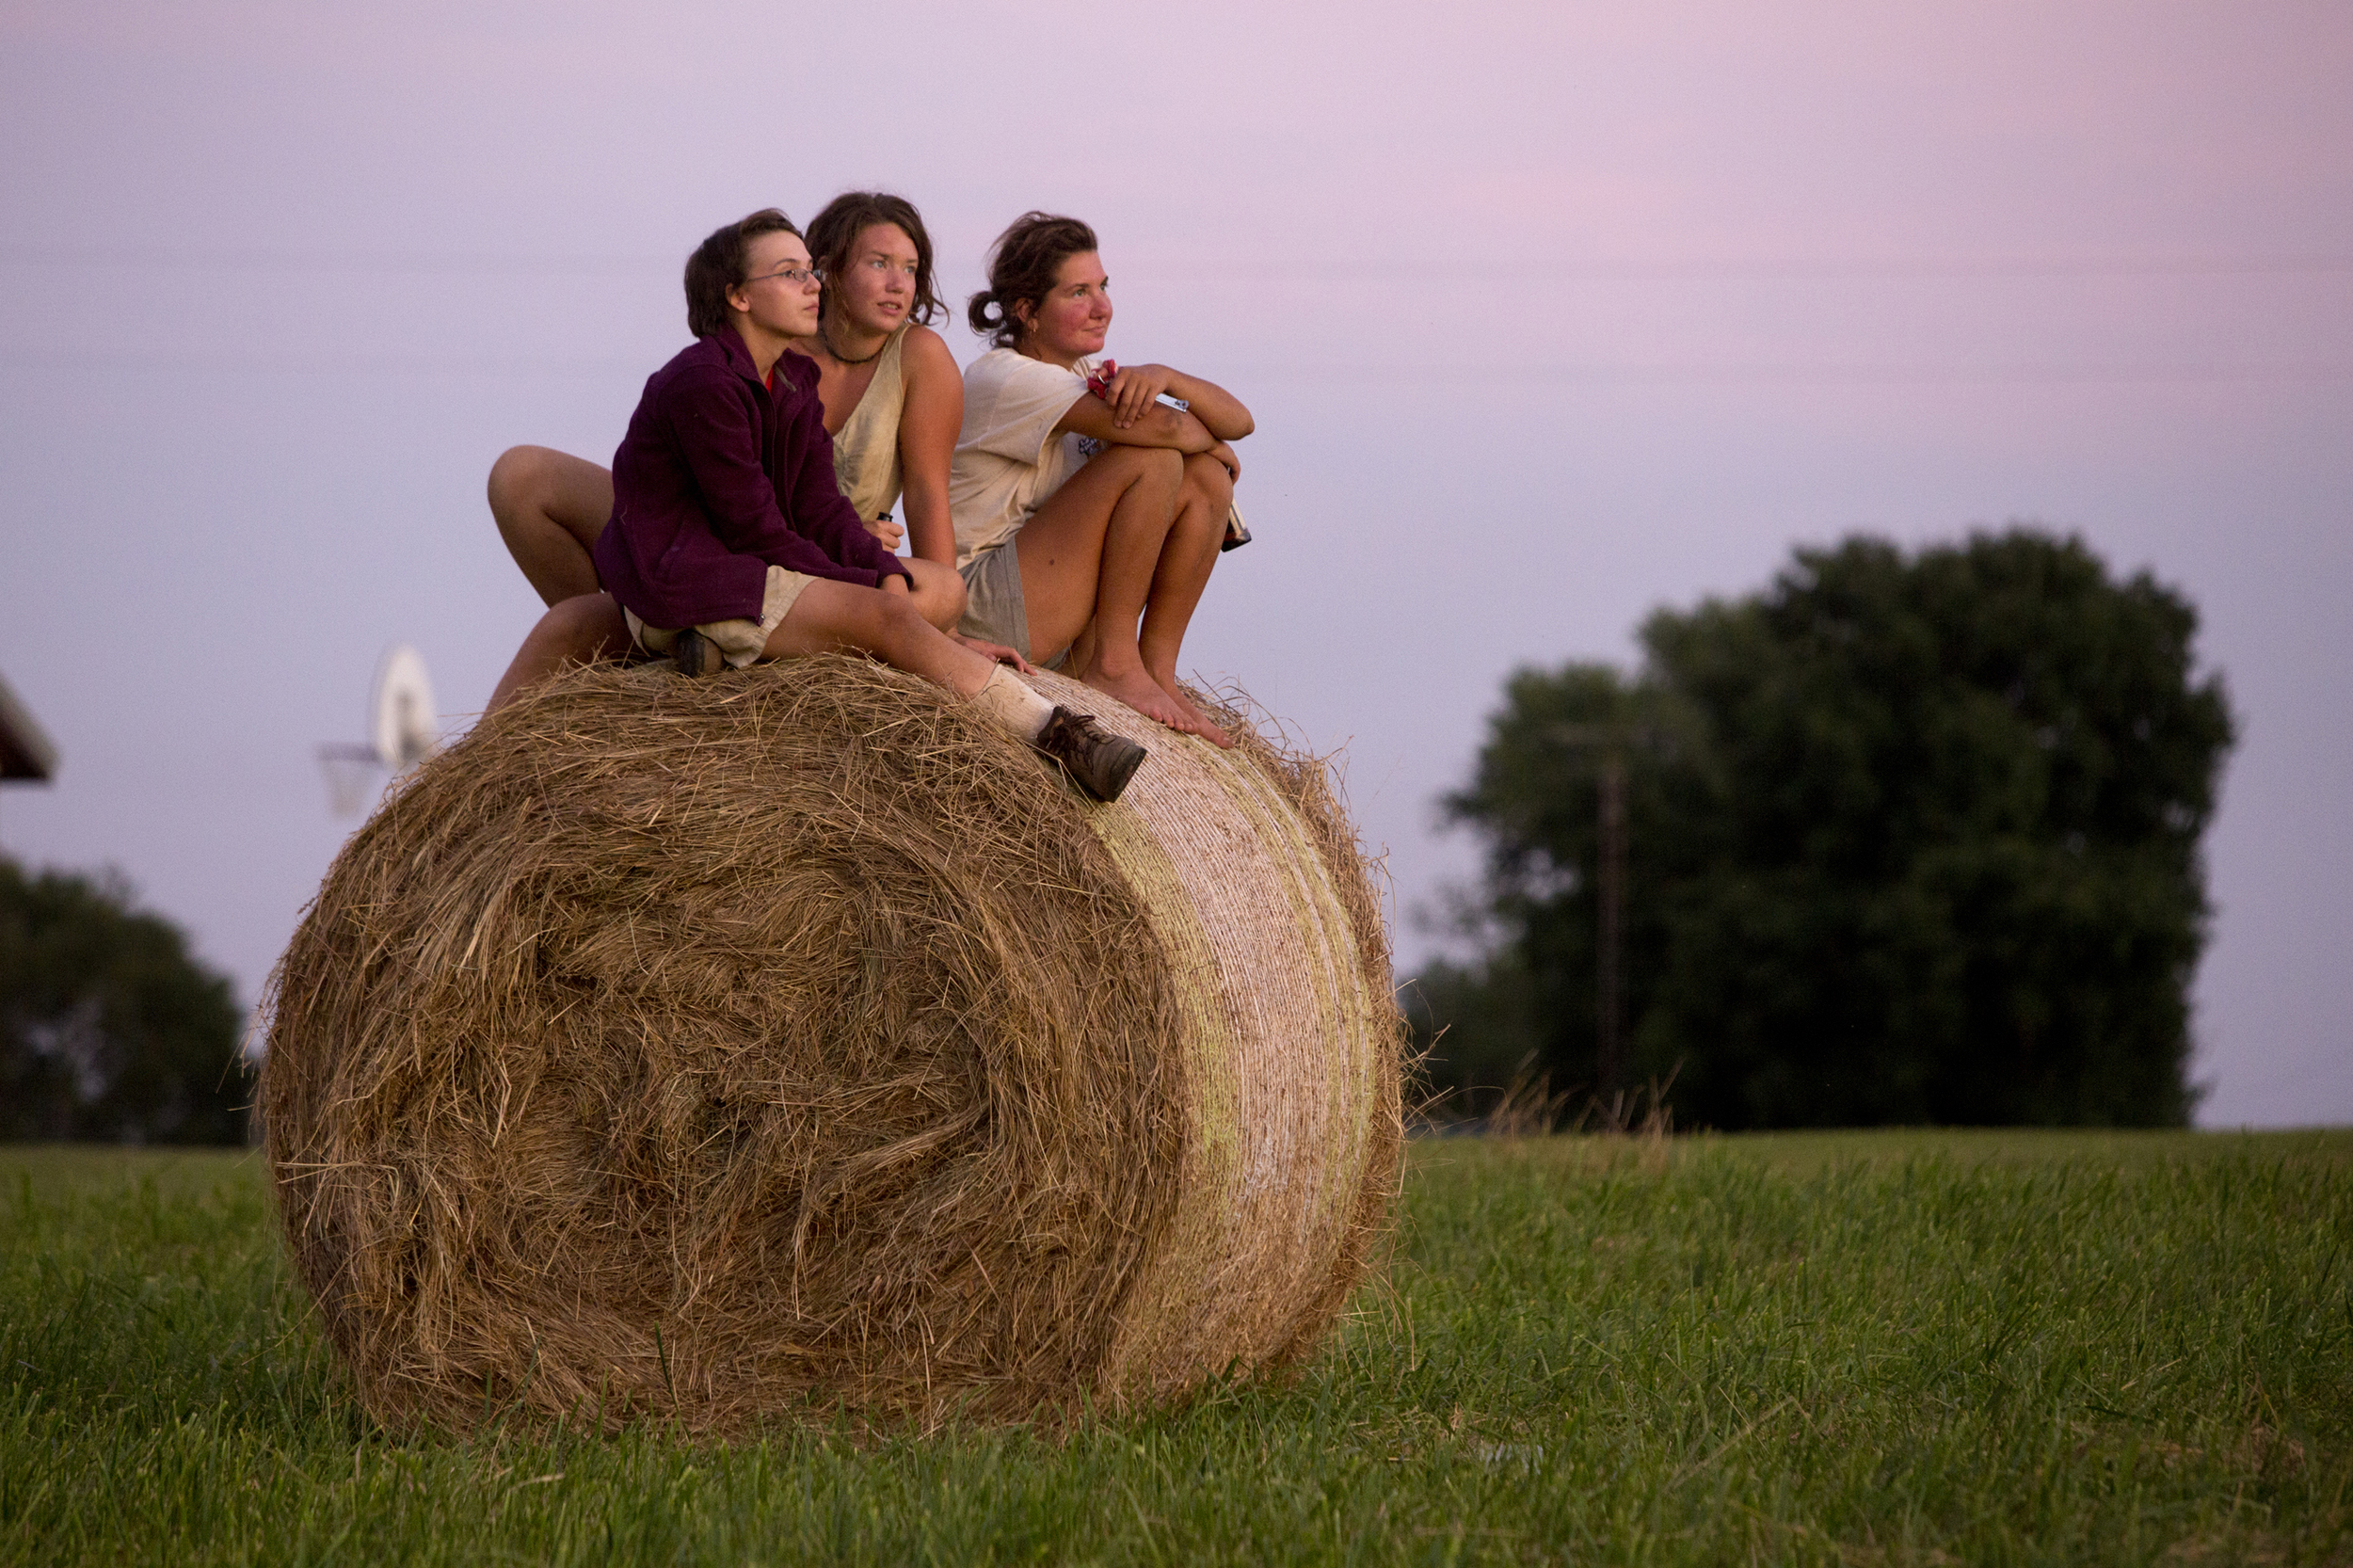  Living Roots Ecovillage farm apprentices Emily Spatt of Fort Wayne, left, Mecie Delffs of Grant Rapids, Mich., and Emily MacGibeny of New London, Conn. soak in the last rays of light across the street from the ecovillage in French Lick, Ind. on July